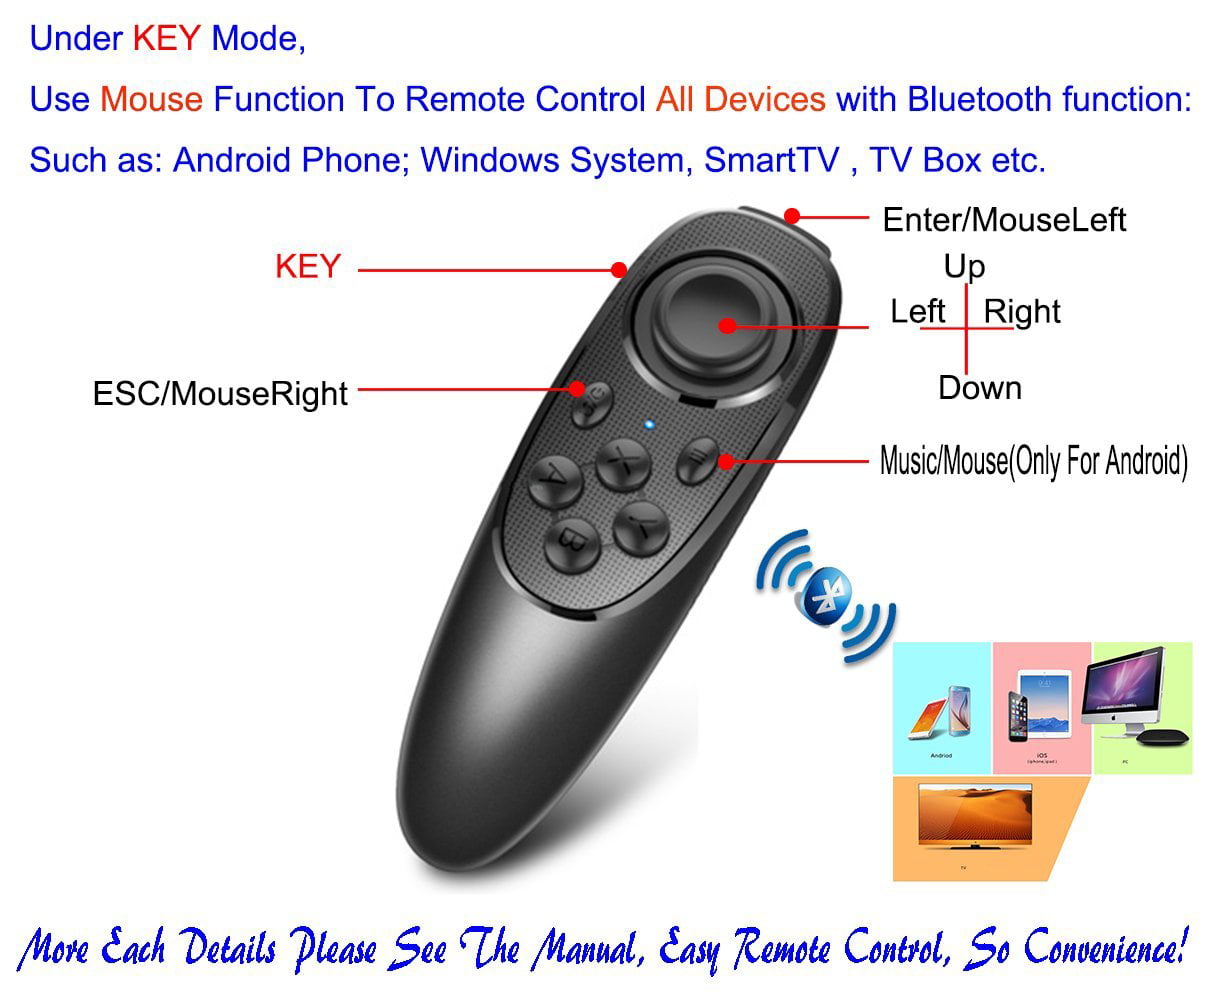 VR Remote Controller Bluetooth Control VR Video, Film, Game, Selfie, Flip E-book/PPT/Nook page, Mouse, in Virtual Reality 3D Glasses PC Tablet laptop Samsung Gear VR iPhone Smart - Walmart.com